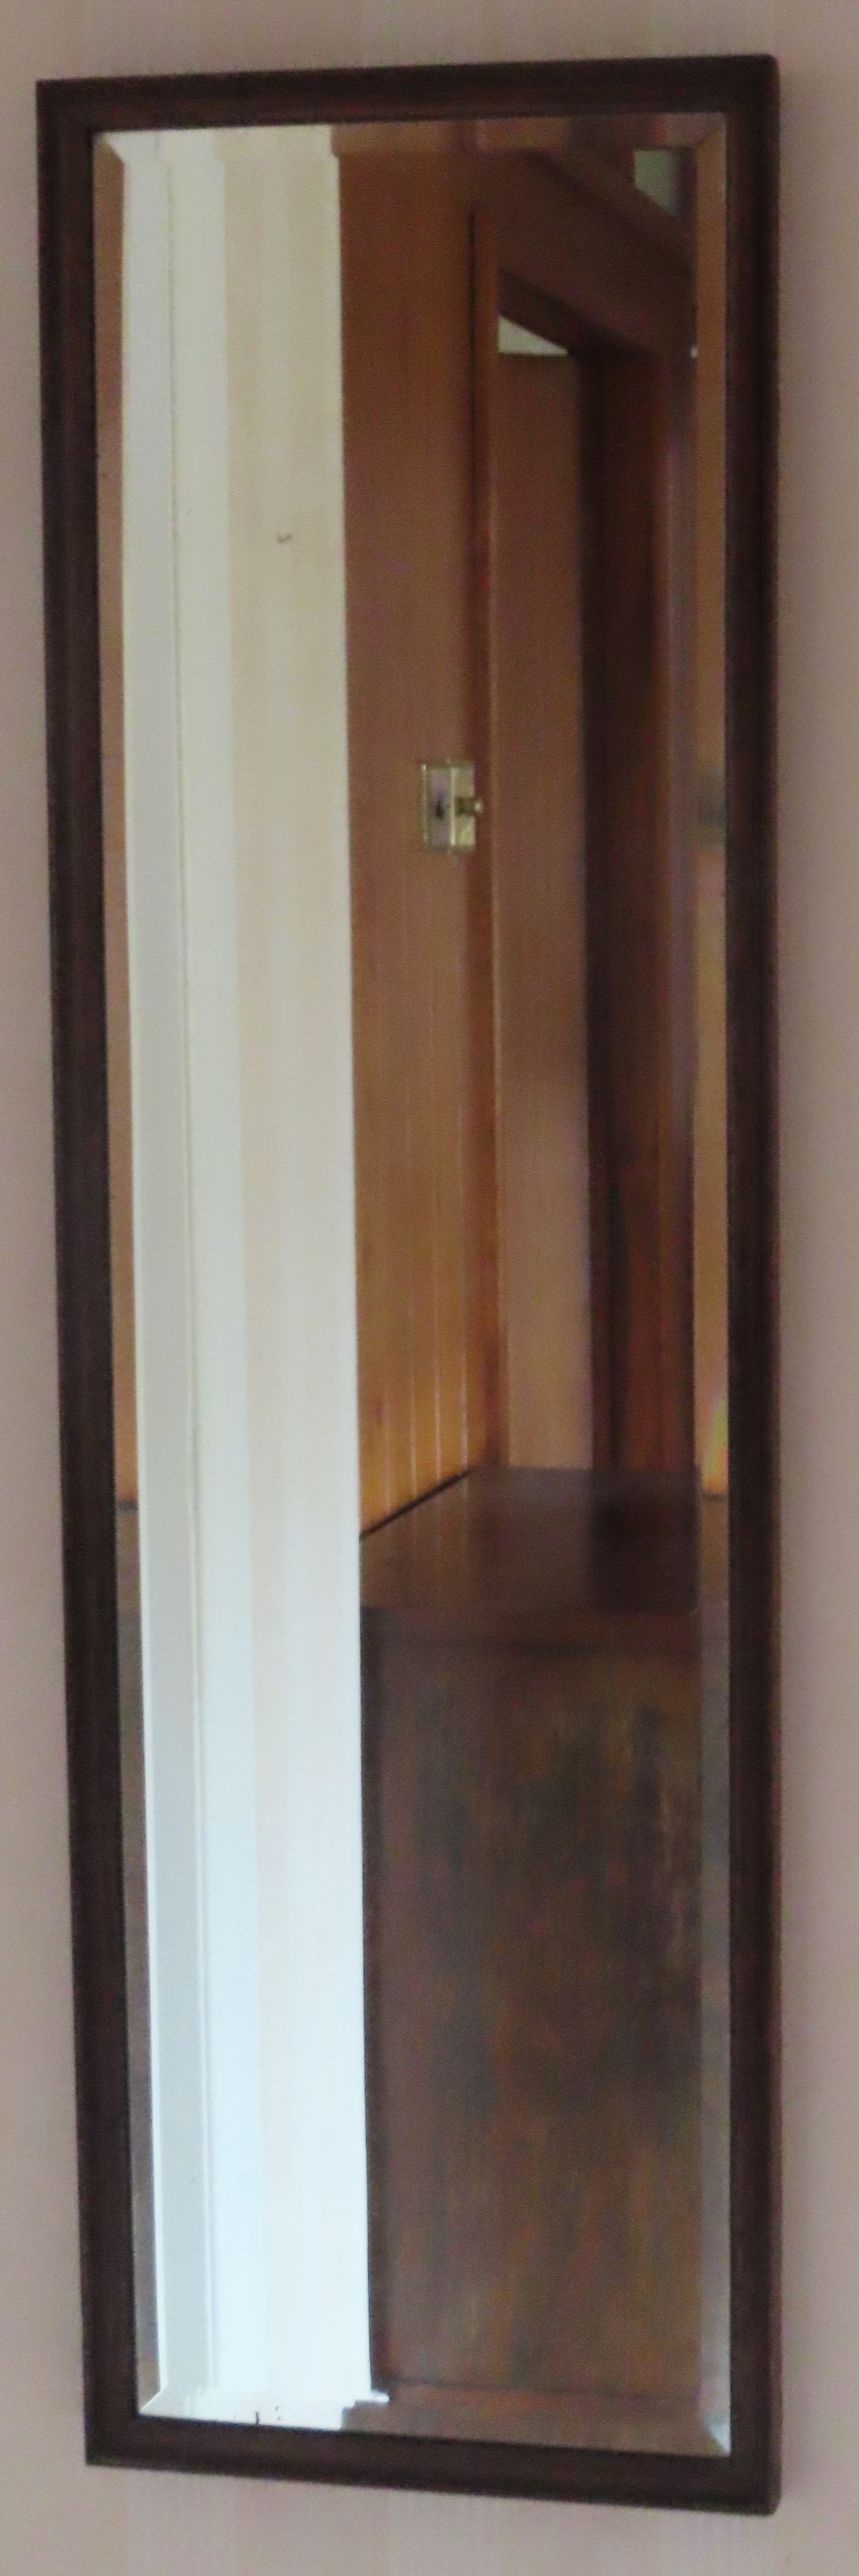 Mid 20th century concave framed bevelled wall mirror. Approx. 110 x 54cms reasonable used condition